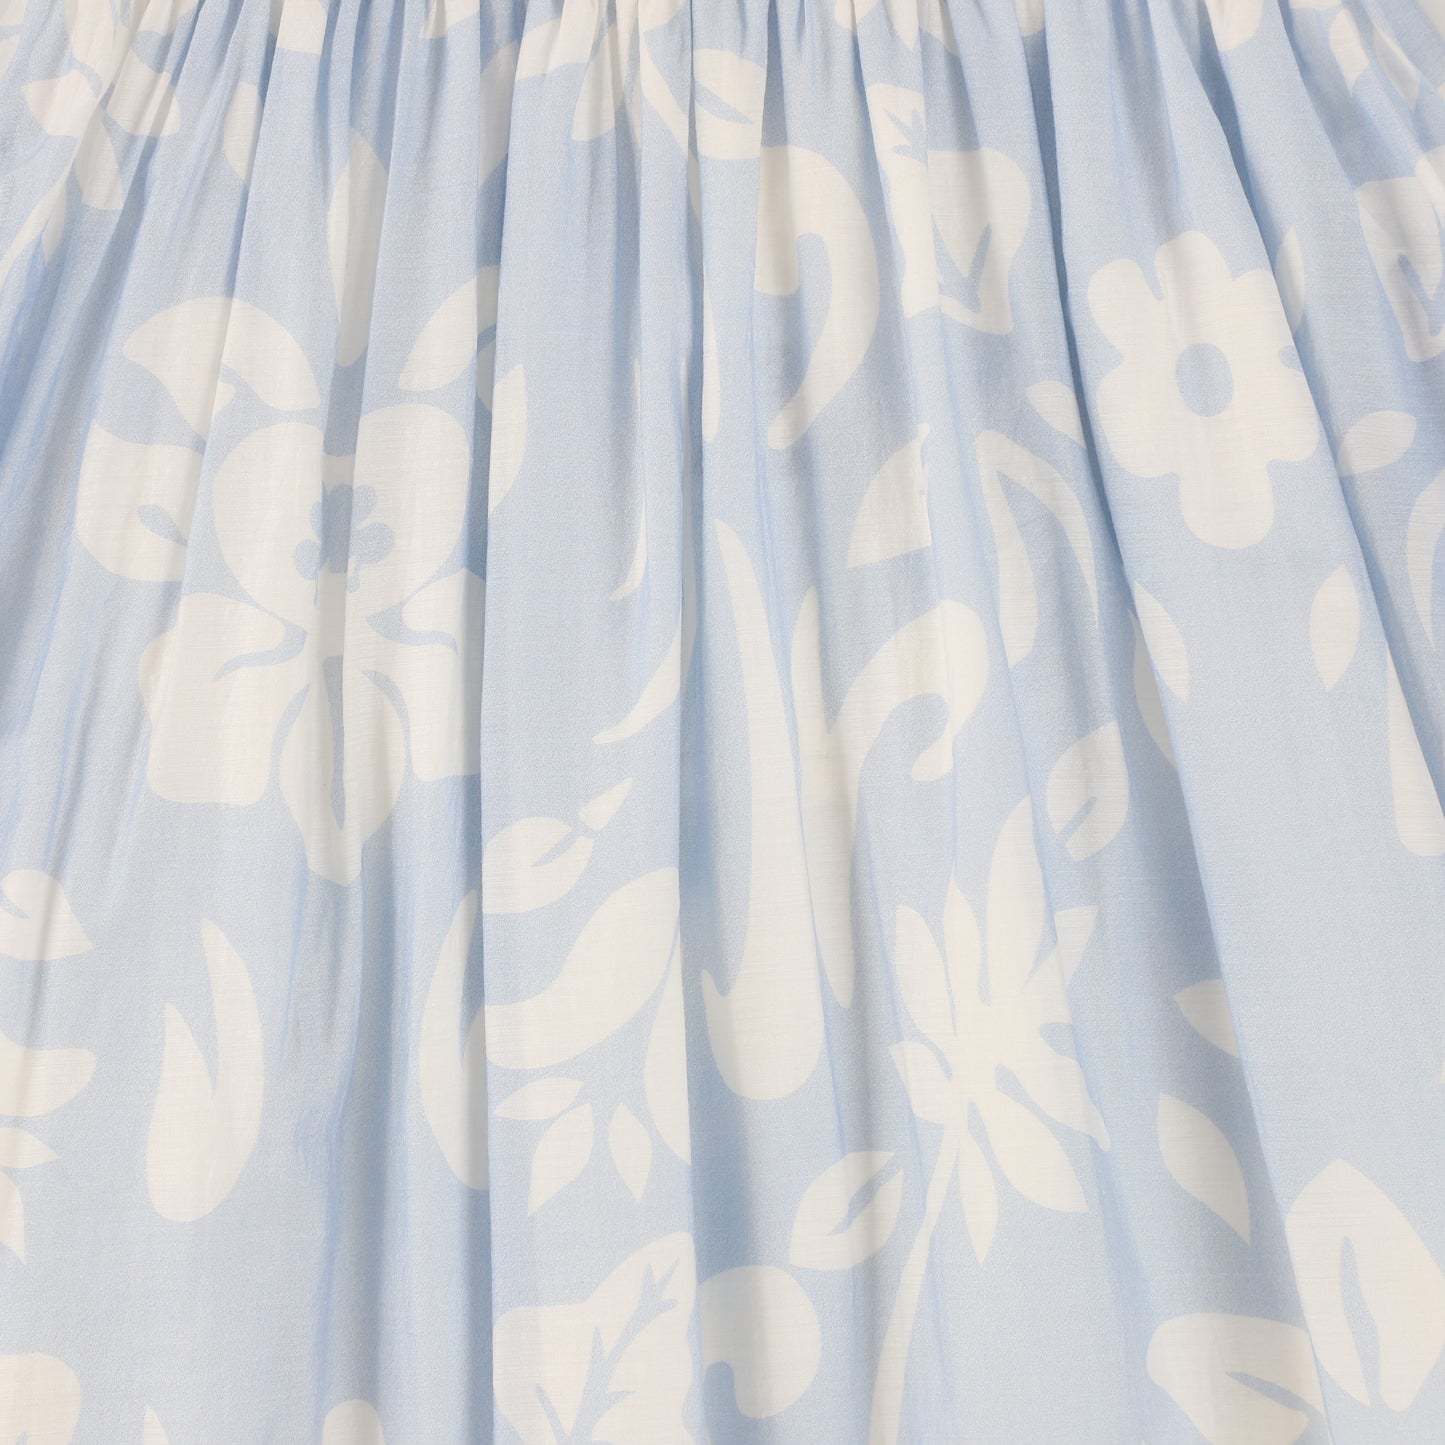 BAMBOO BLUE FLORAL PRINTED MIDI SKIRT [FINAL SALE]